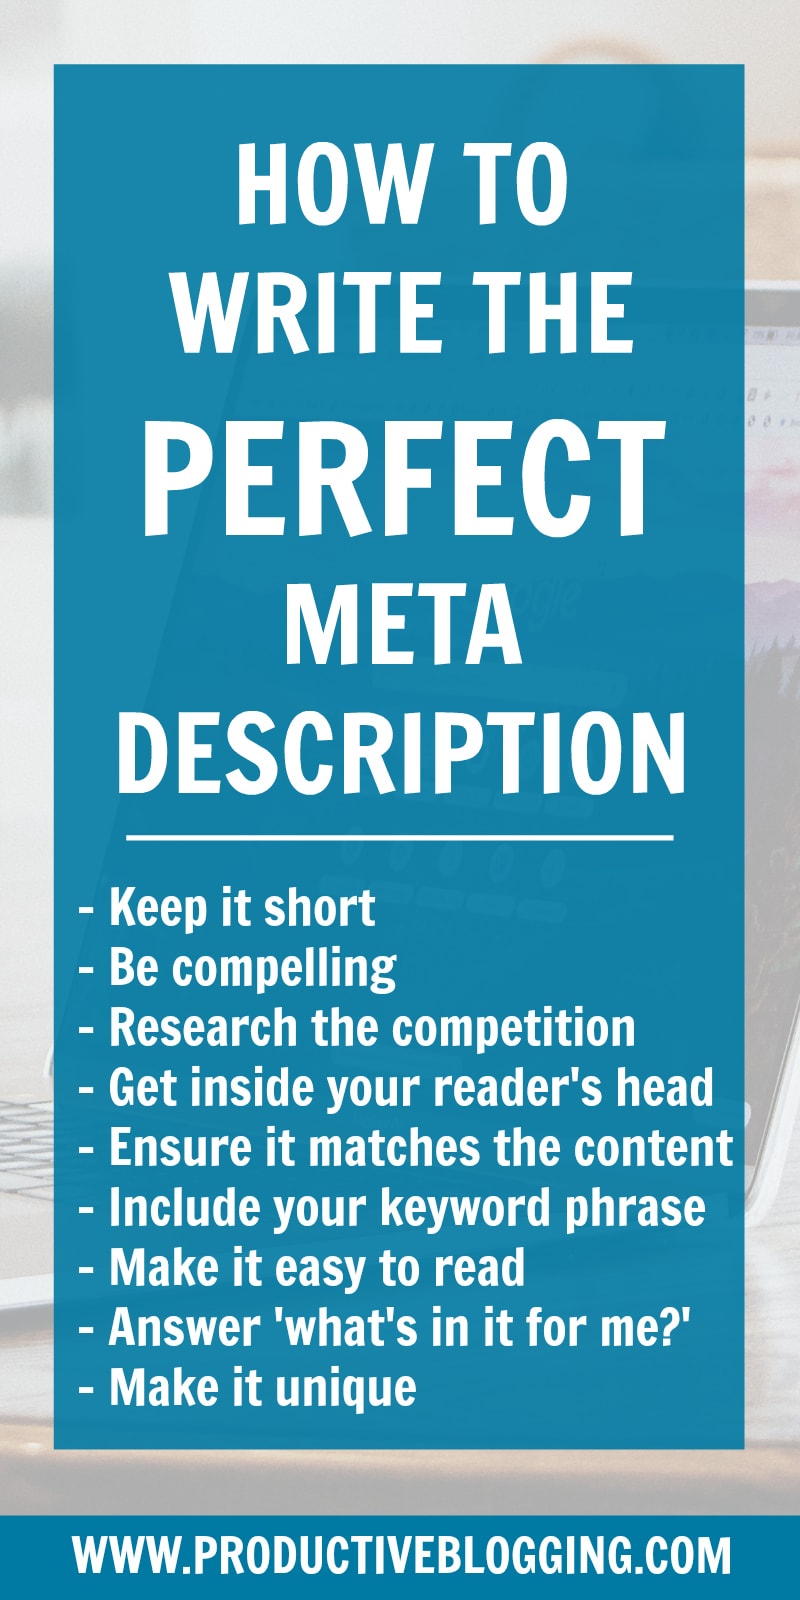 A good meta description can have a dramatic effect on your SEO and consequently your blog traffic. But what exactly is a meta description, and how does it affect your SEO? Find out how to write the perfect meta description to maximise search engine traffic and grow your blog! #metadescription #SEOforbloggers #SEOforbeginners #beginnersSEO #SEO #SEOtips #Yoast #searchengineoptimization #keywords #growyourblog #bloggrowth #bloggingtips #blogging #bloggers #blogsmarternotharder #productiveblogging